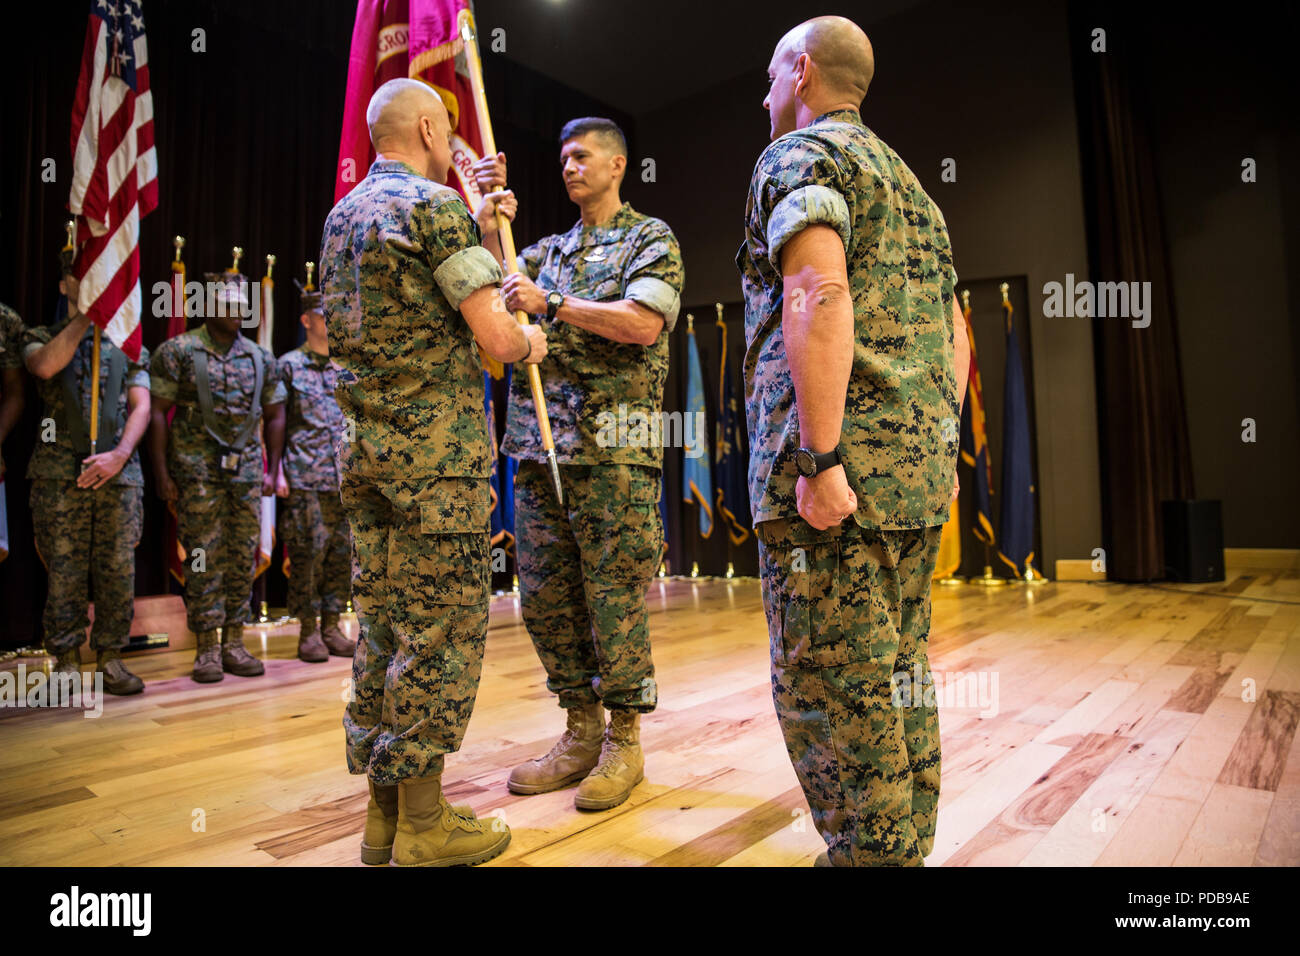 Brig. Gen. Mark Hashimoto, center, incoming commander of Force Headquarters Group, receives the colors from Maj. Gen. Michael F. Fahey, left, outgoing commander of FHG, during the change of command ceremony at the Federal City Auditorium, New Orleans, Aug. 3, 2018. While addressing the attendees, Fahey expressed his total confidence in Hashimoto as the new commander. (U.S. Marine Corps photo by Sgt. Melissa Martens) Stock Photo